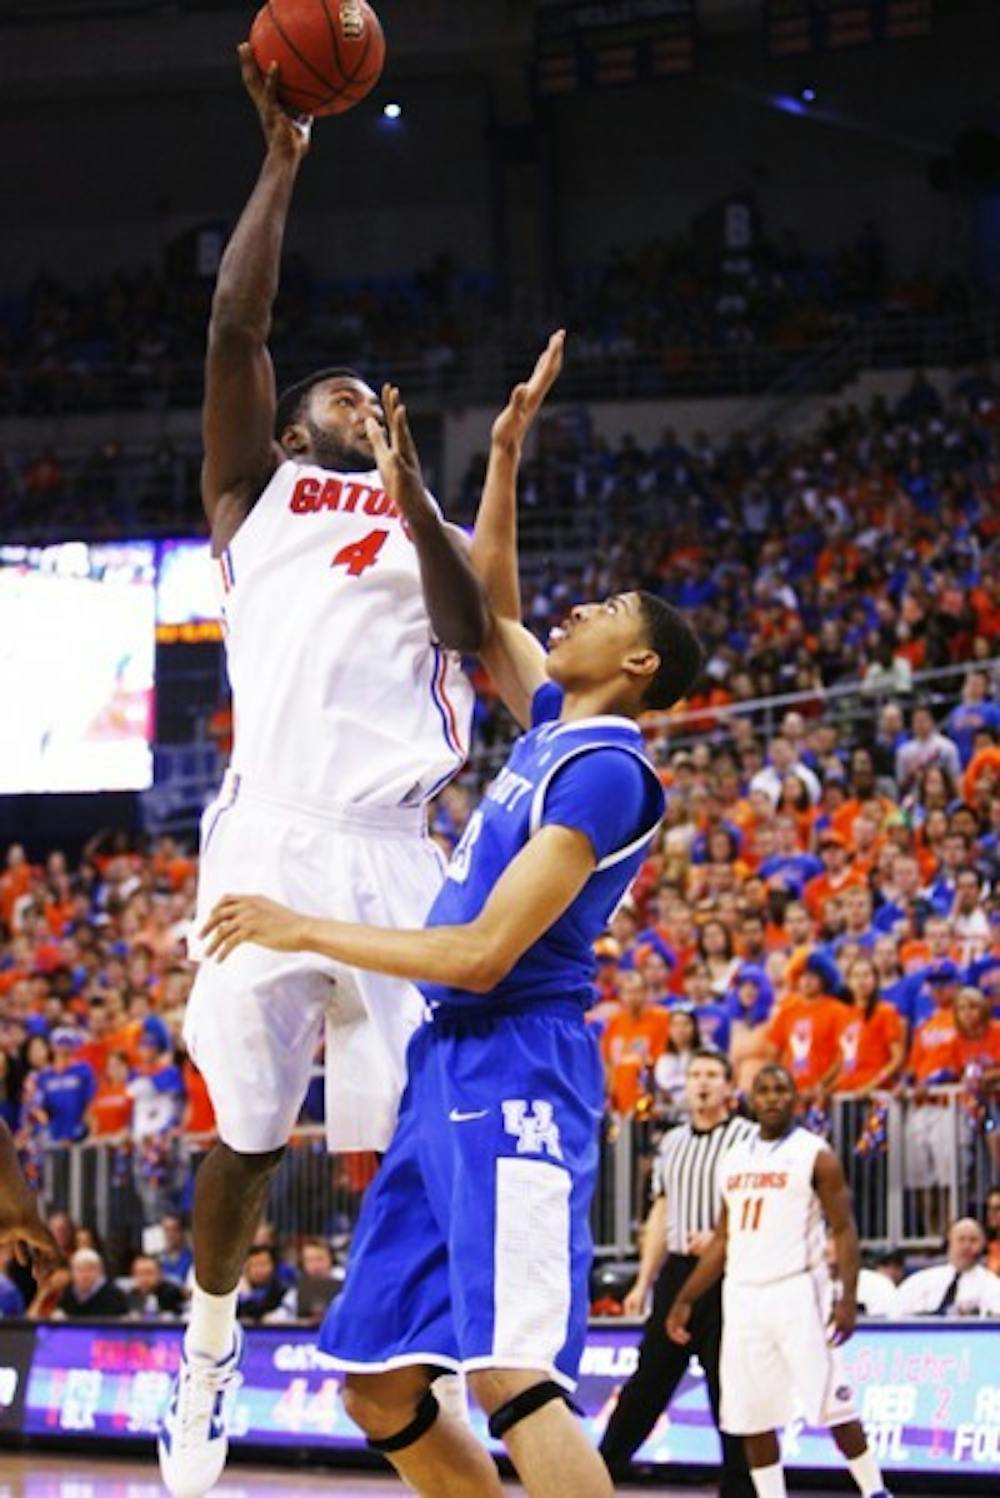 <p>Florida junior Patric Young scored a team-high 21 points on 10-of-15 shooting and hauled in nine rebounds against Anthony Davis and Kentucky, but could not prevent the Wildcats from notching their 16th win in SEC play.</p>